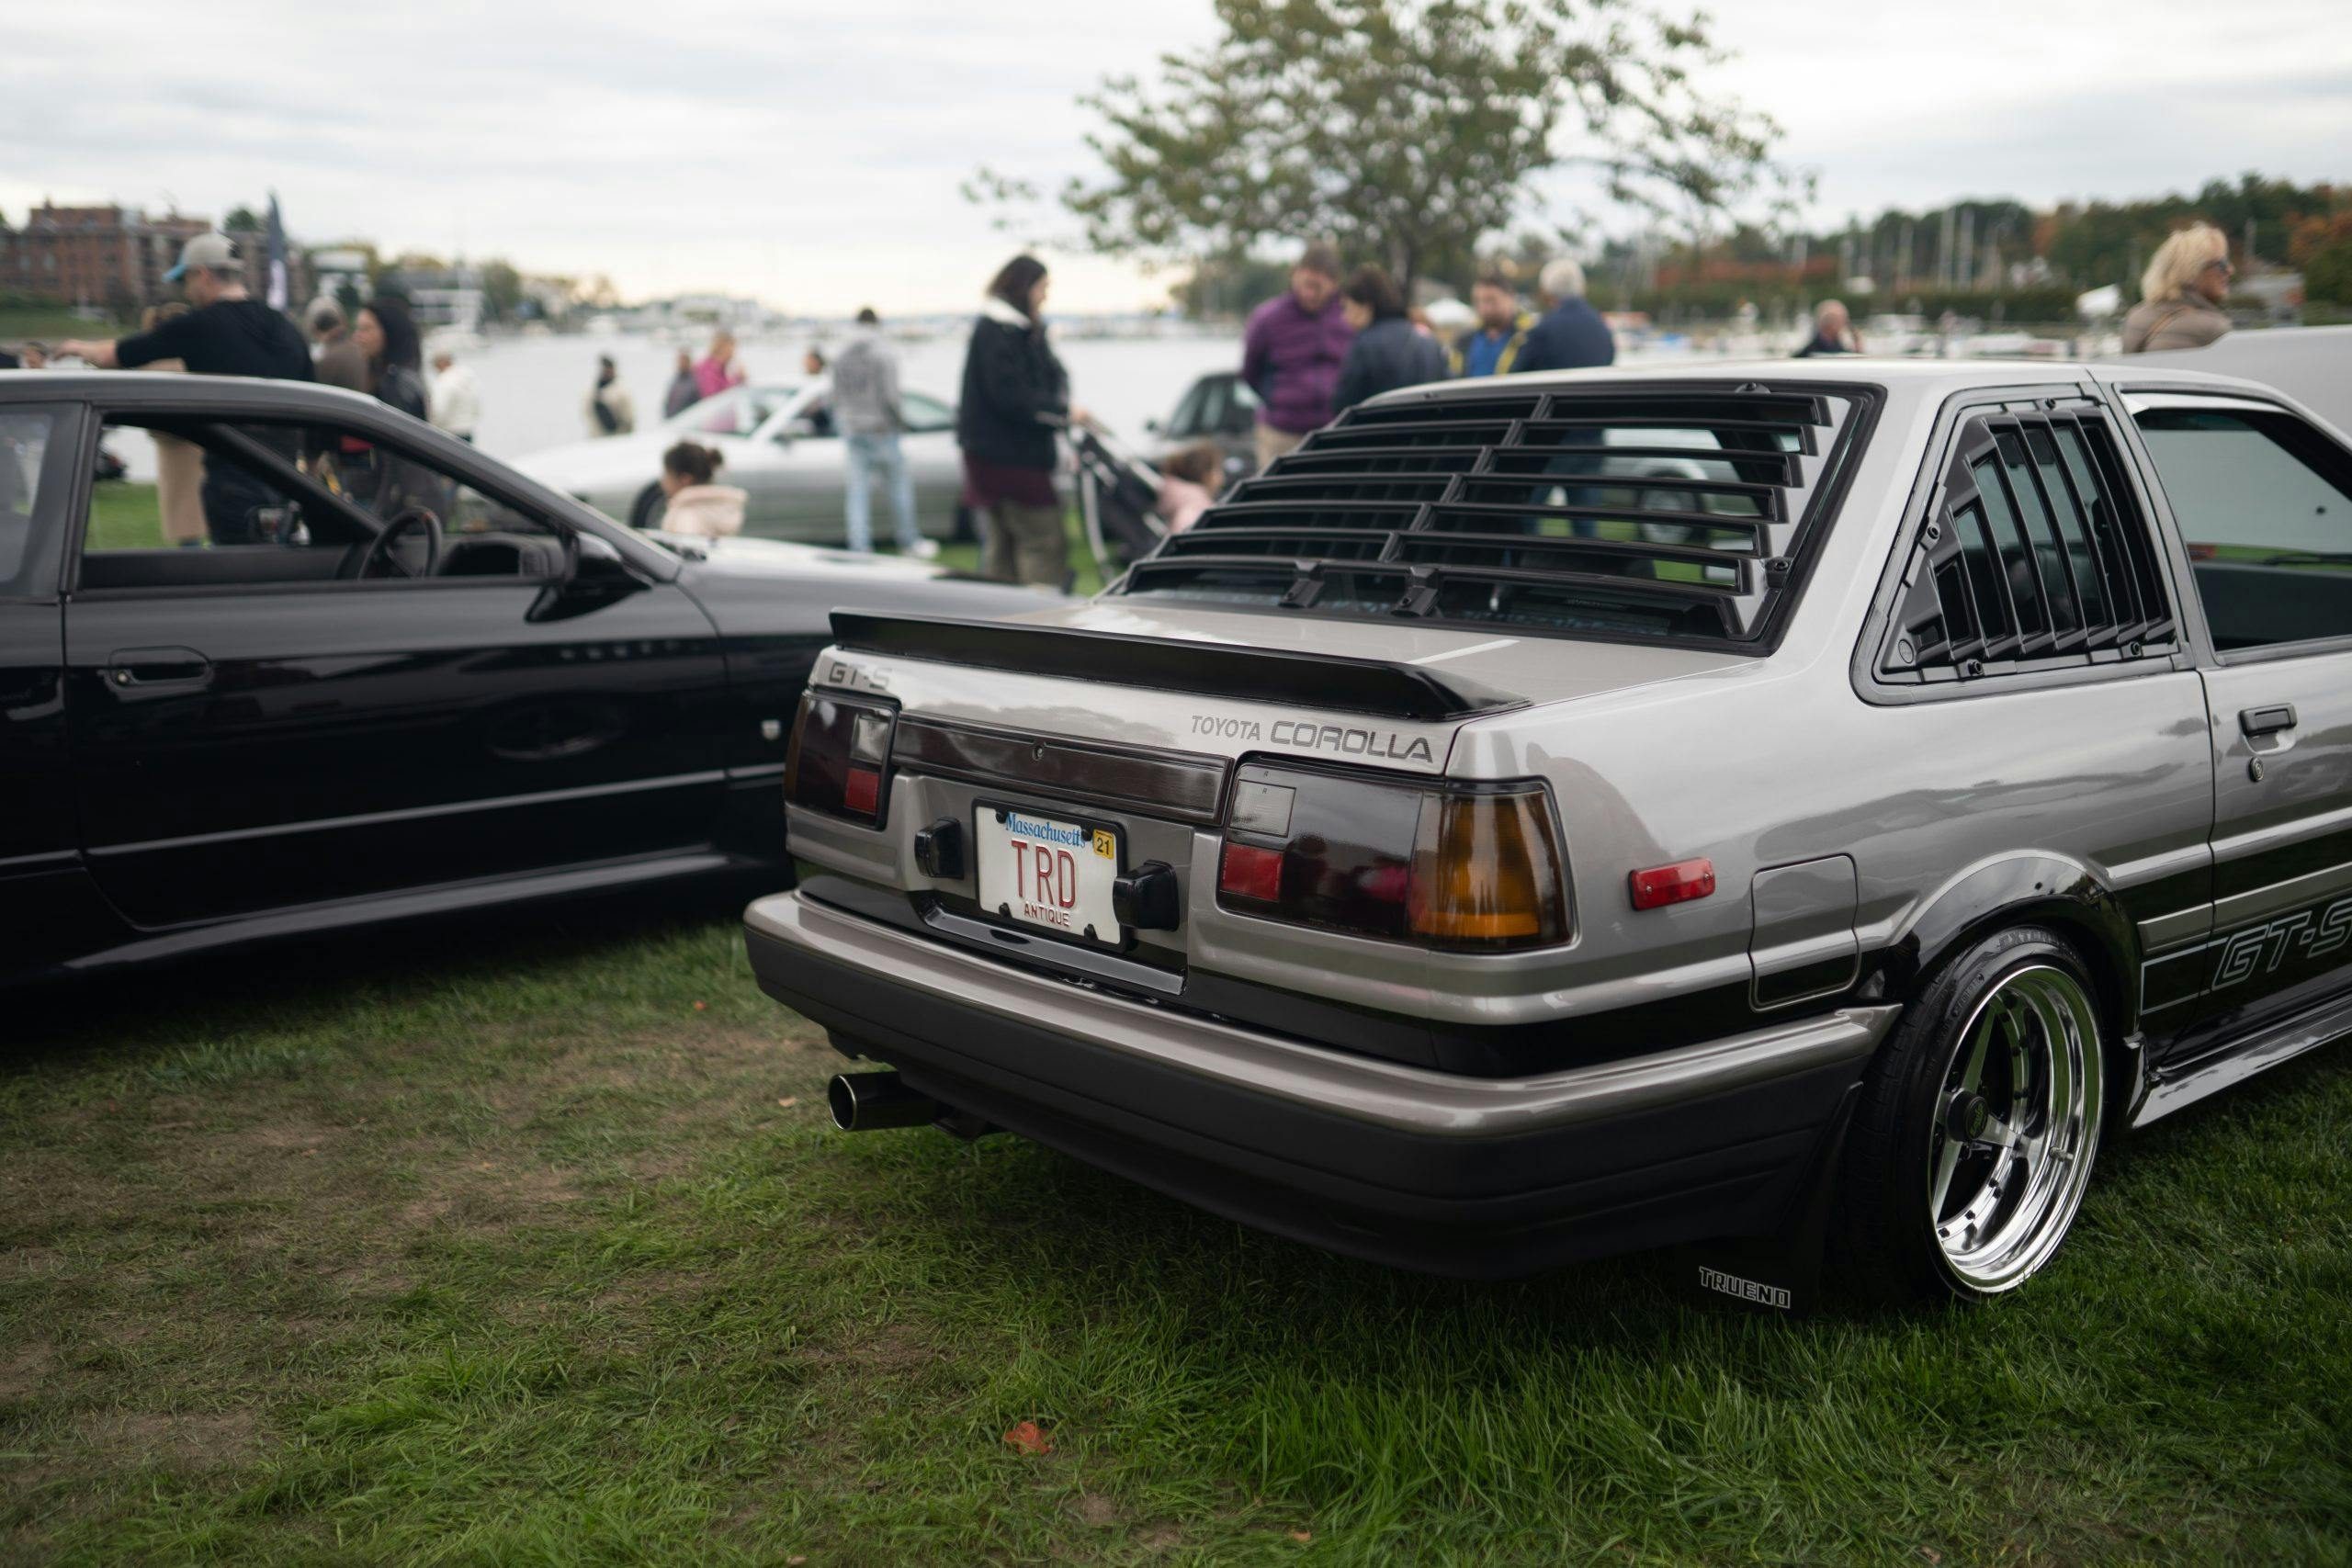 Toyota Corolla sits on the show field at RADwood event